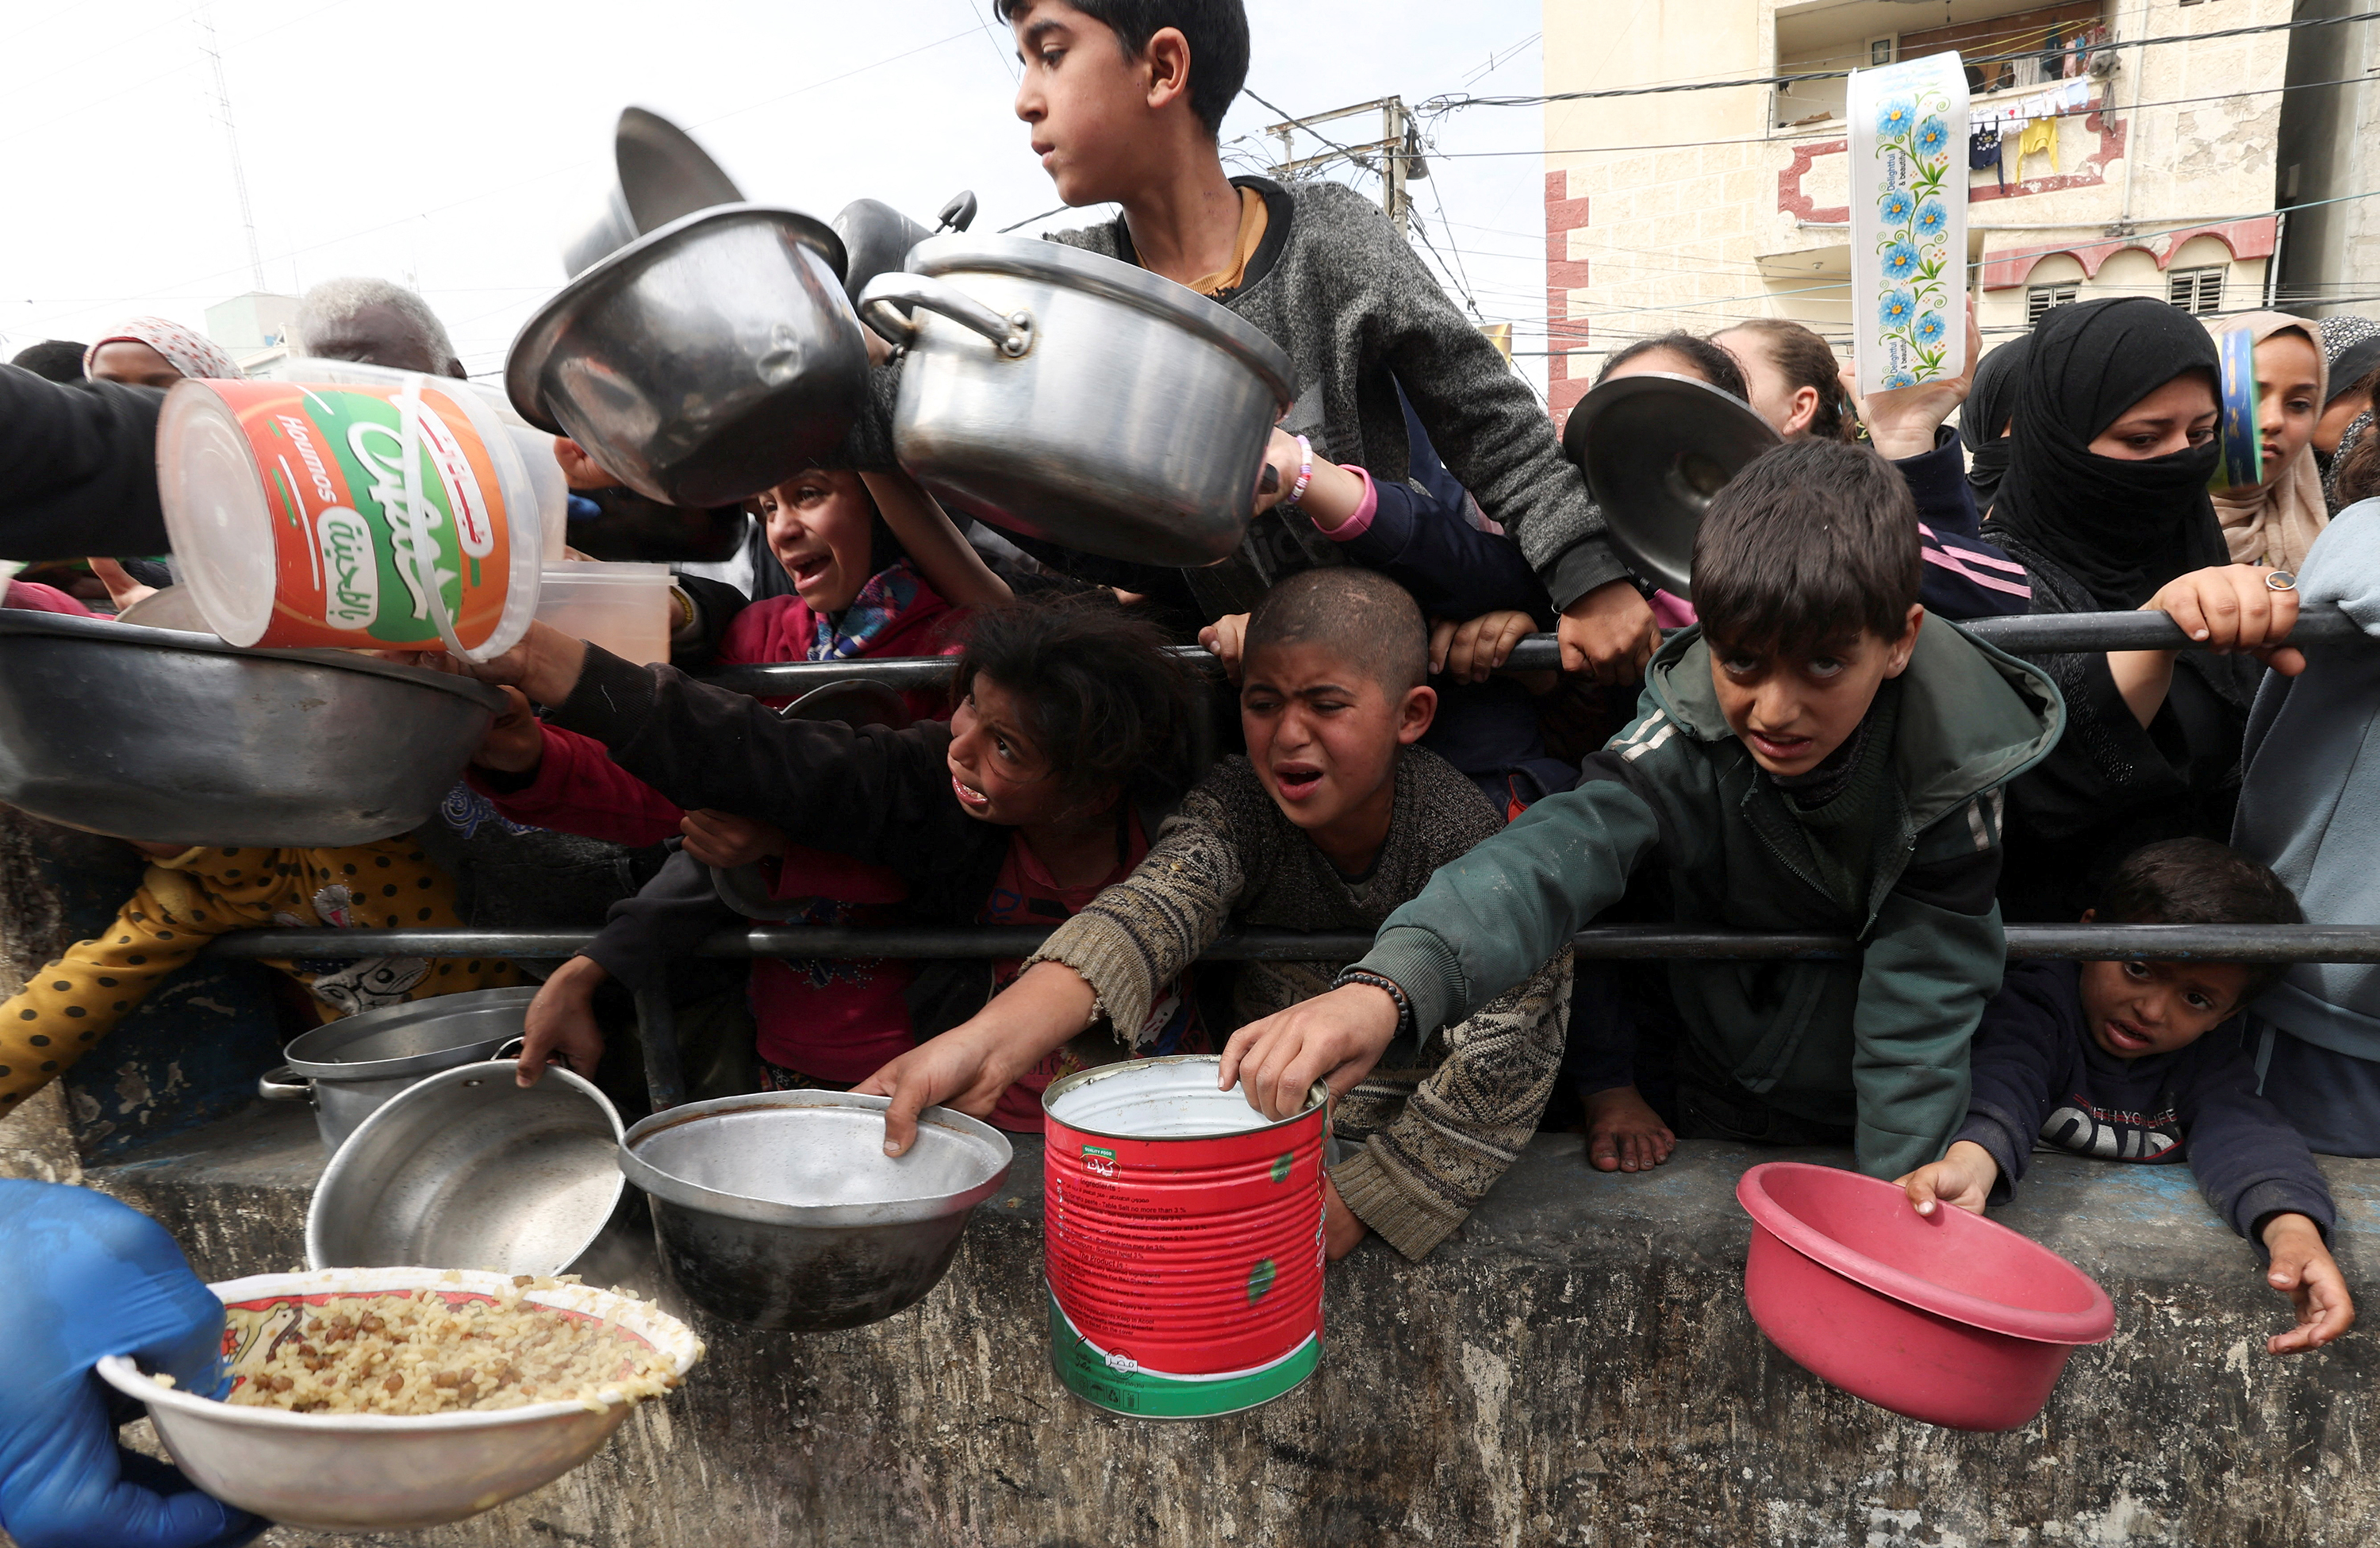 Children wait to receive food cooked by a charity kitchen in Rafah, Gaza, on February 13.